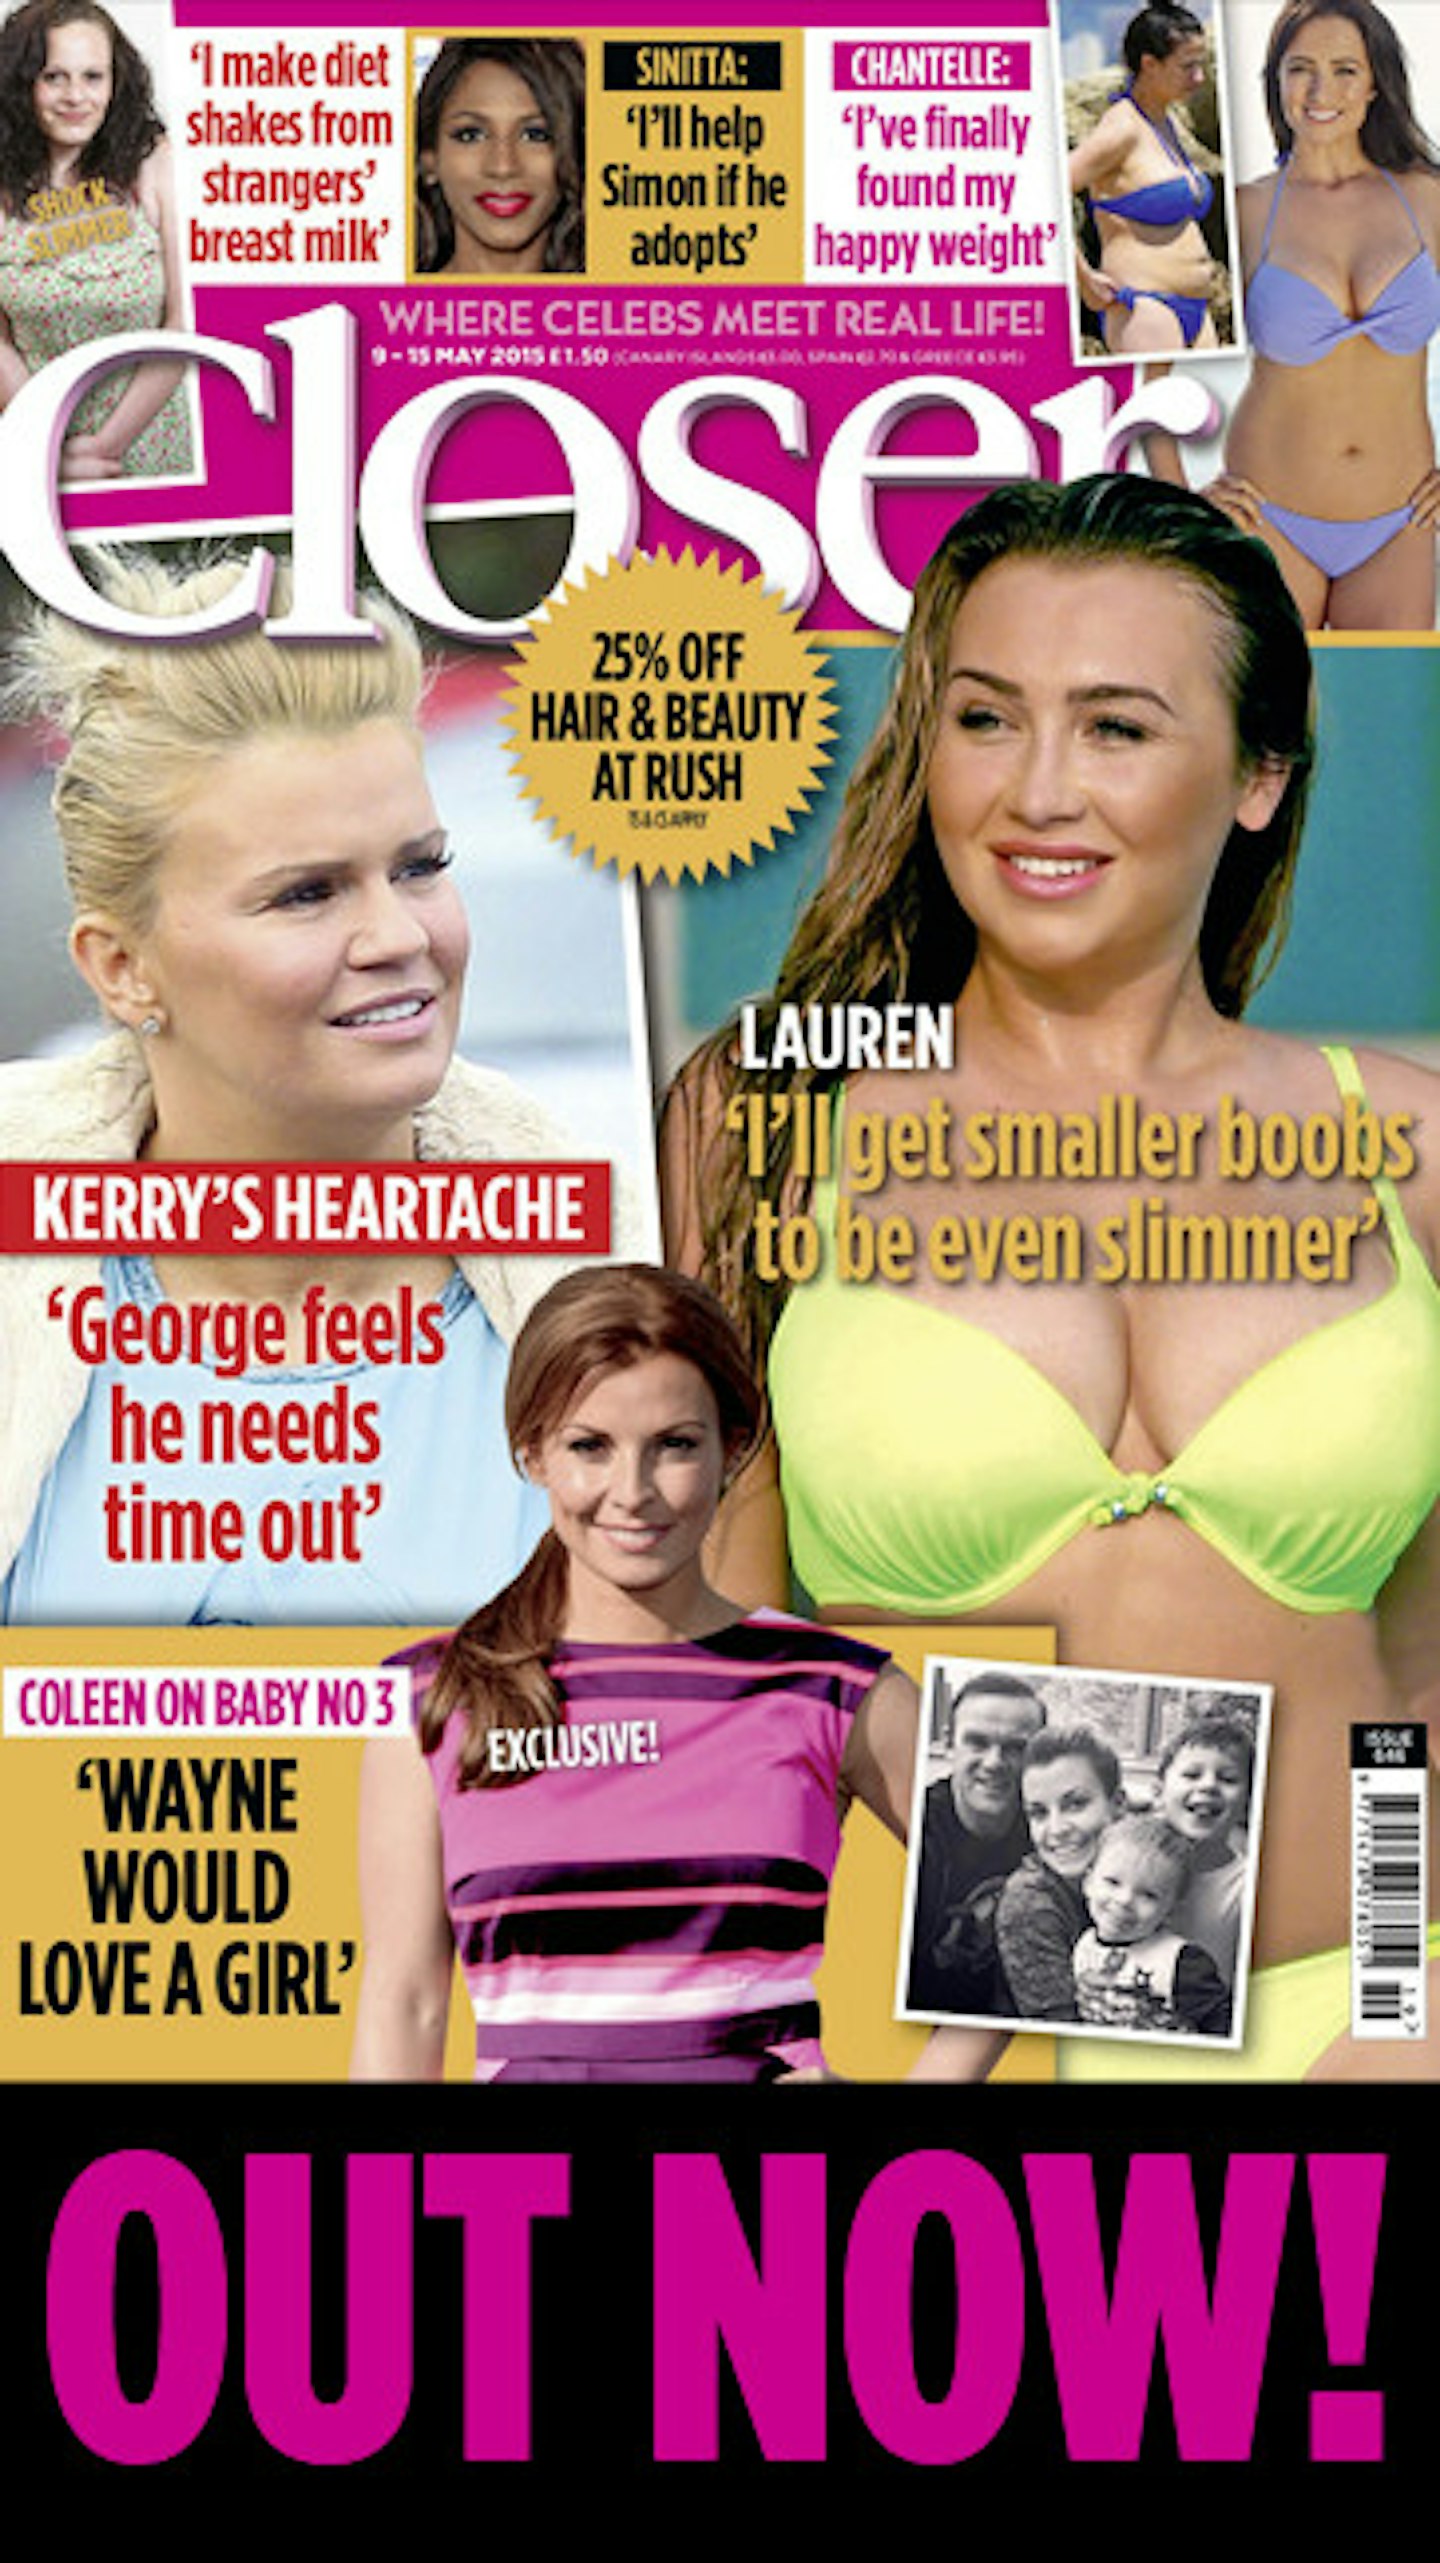 Get this week's Closer for Lauren Goodger's quest for smaller boobs and  Kerry Katona's heartache